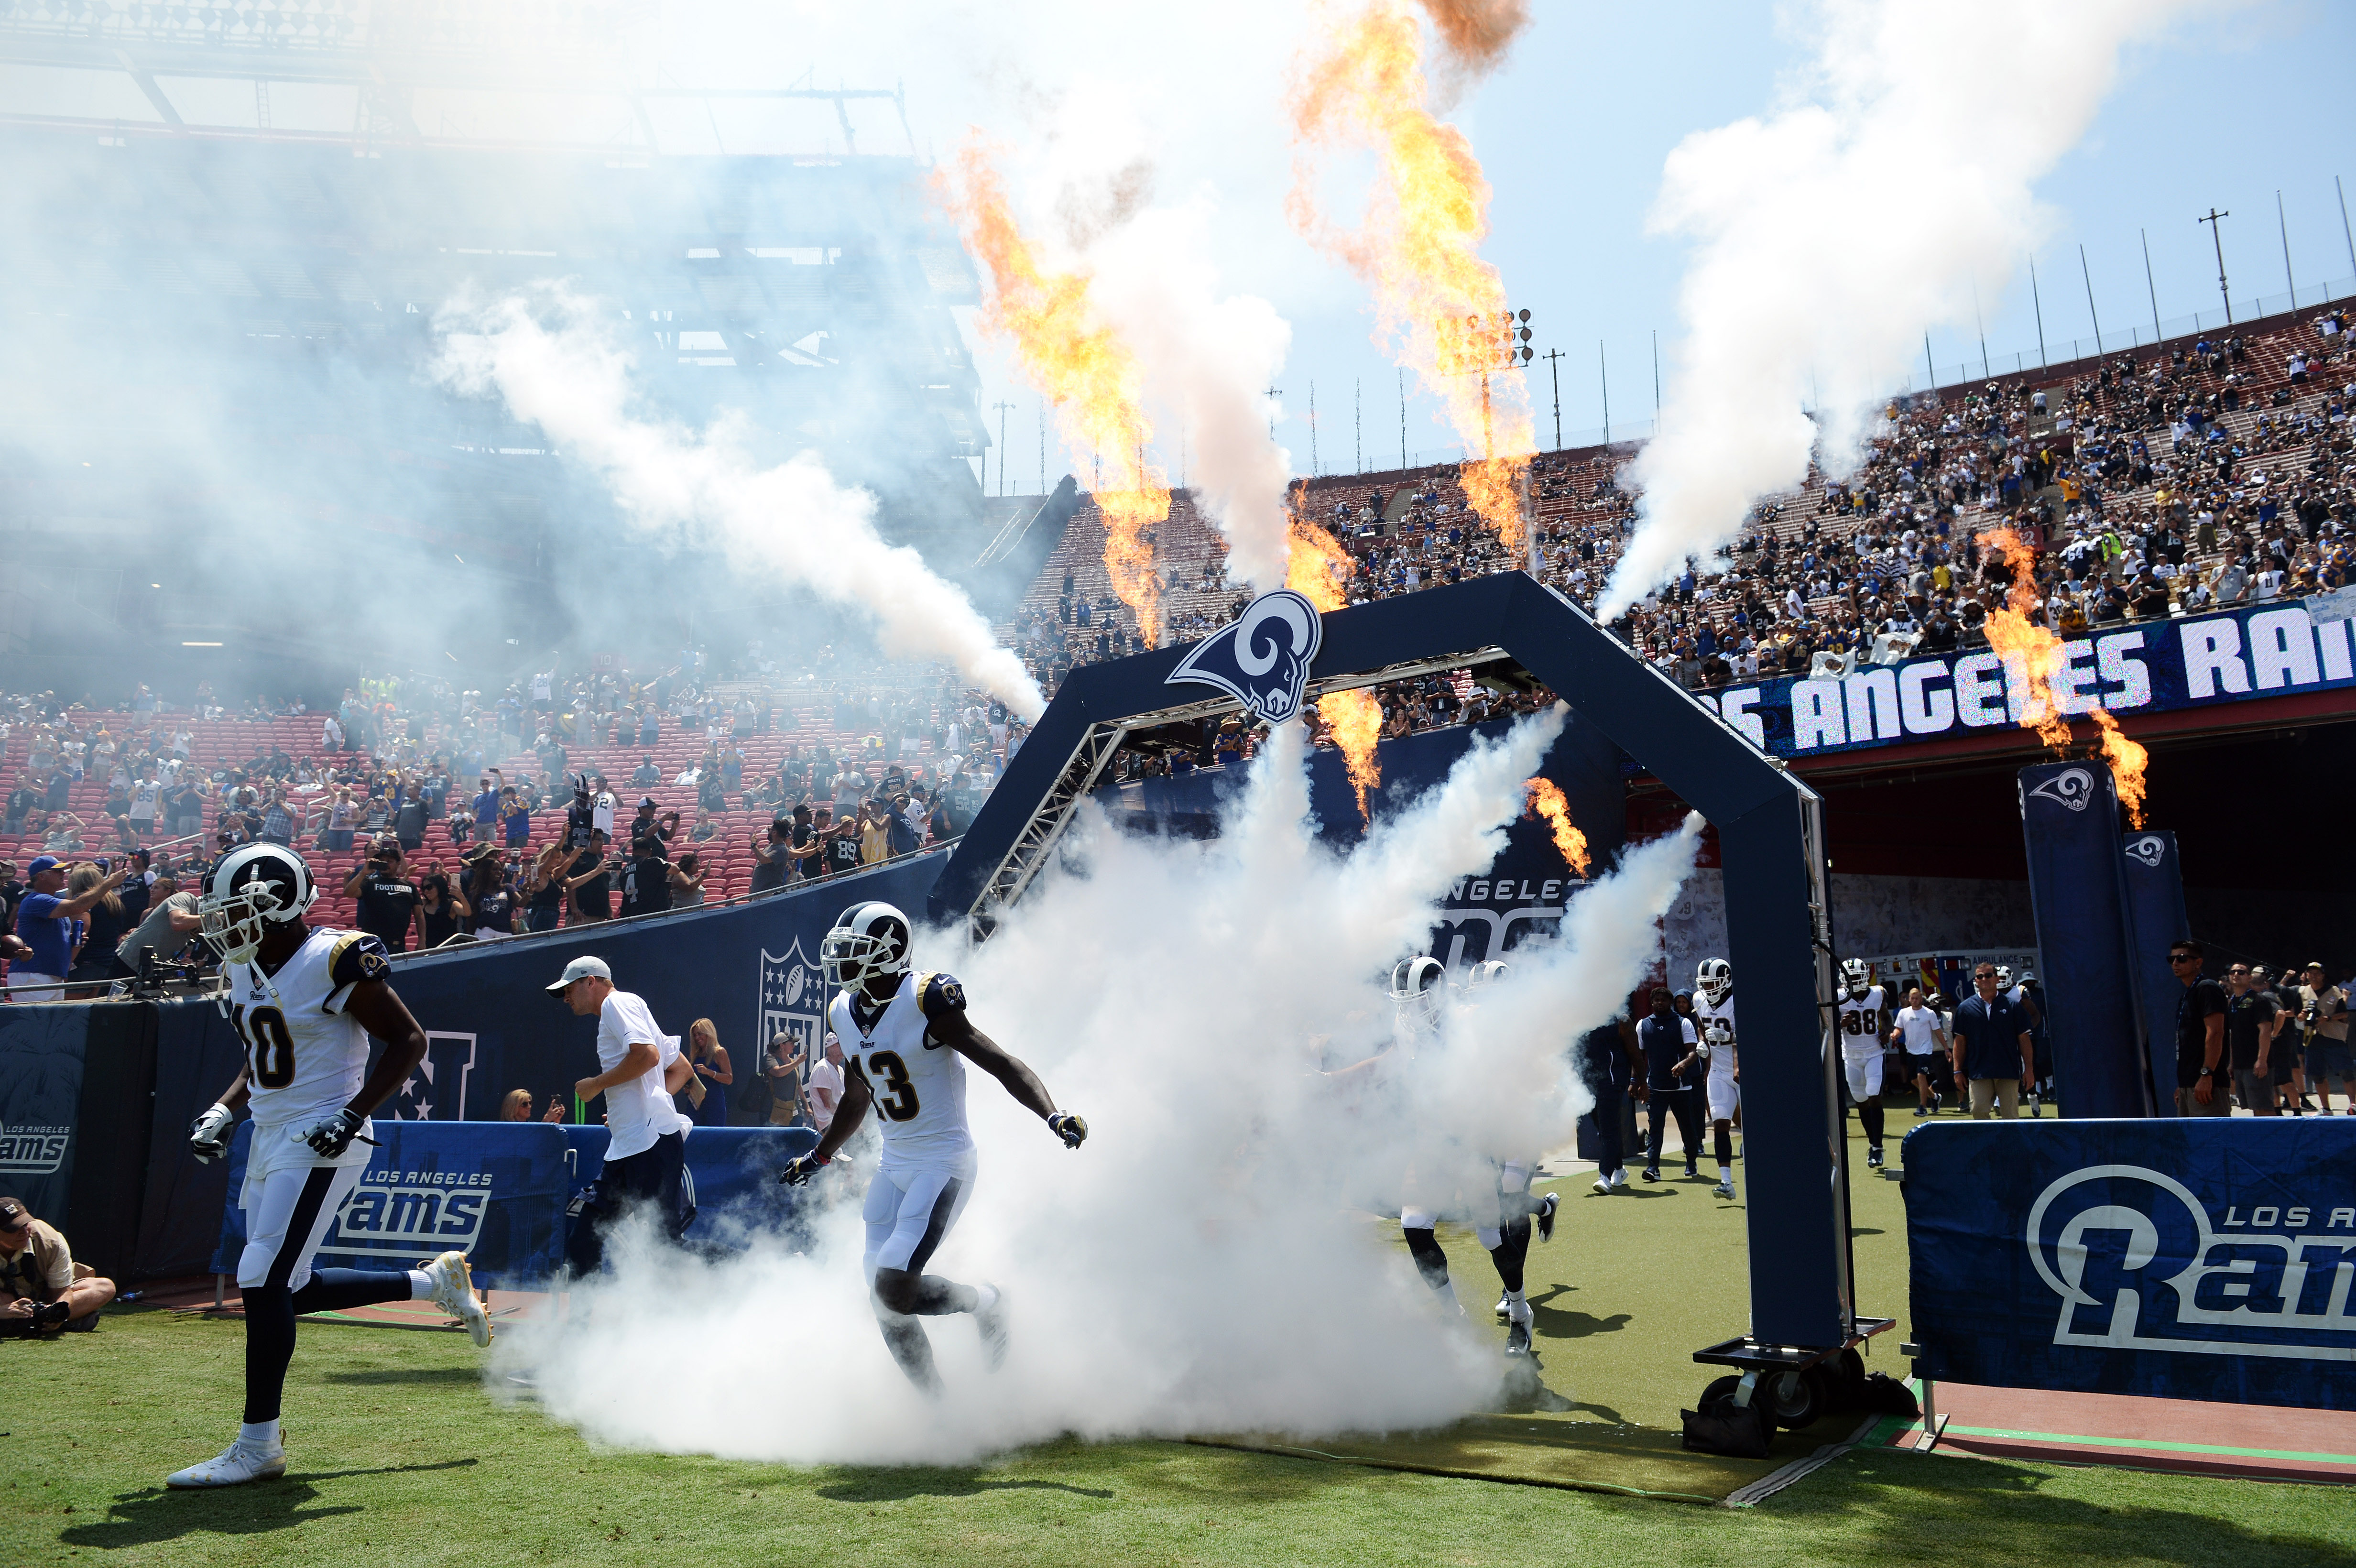 The Los Angeles Rams take the field before playing against the Oakland Raiders at Los Angeles Memorial Coliseum in Week 2 of the preseason, August 18, 2018.